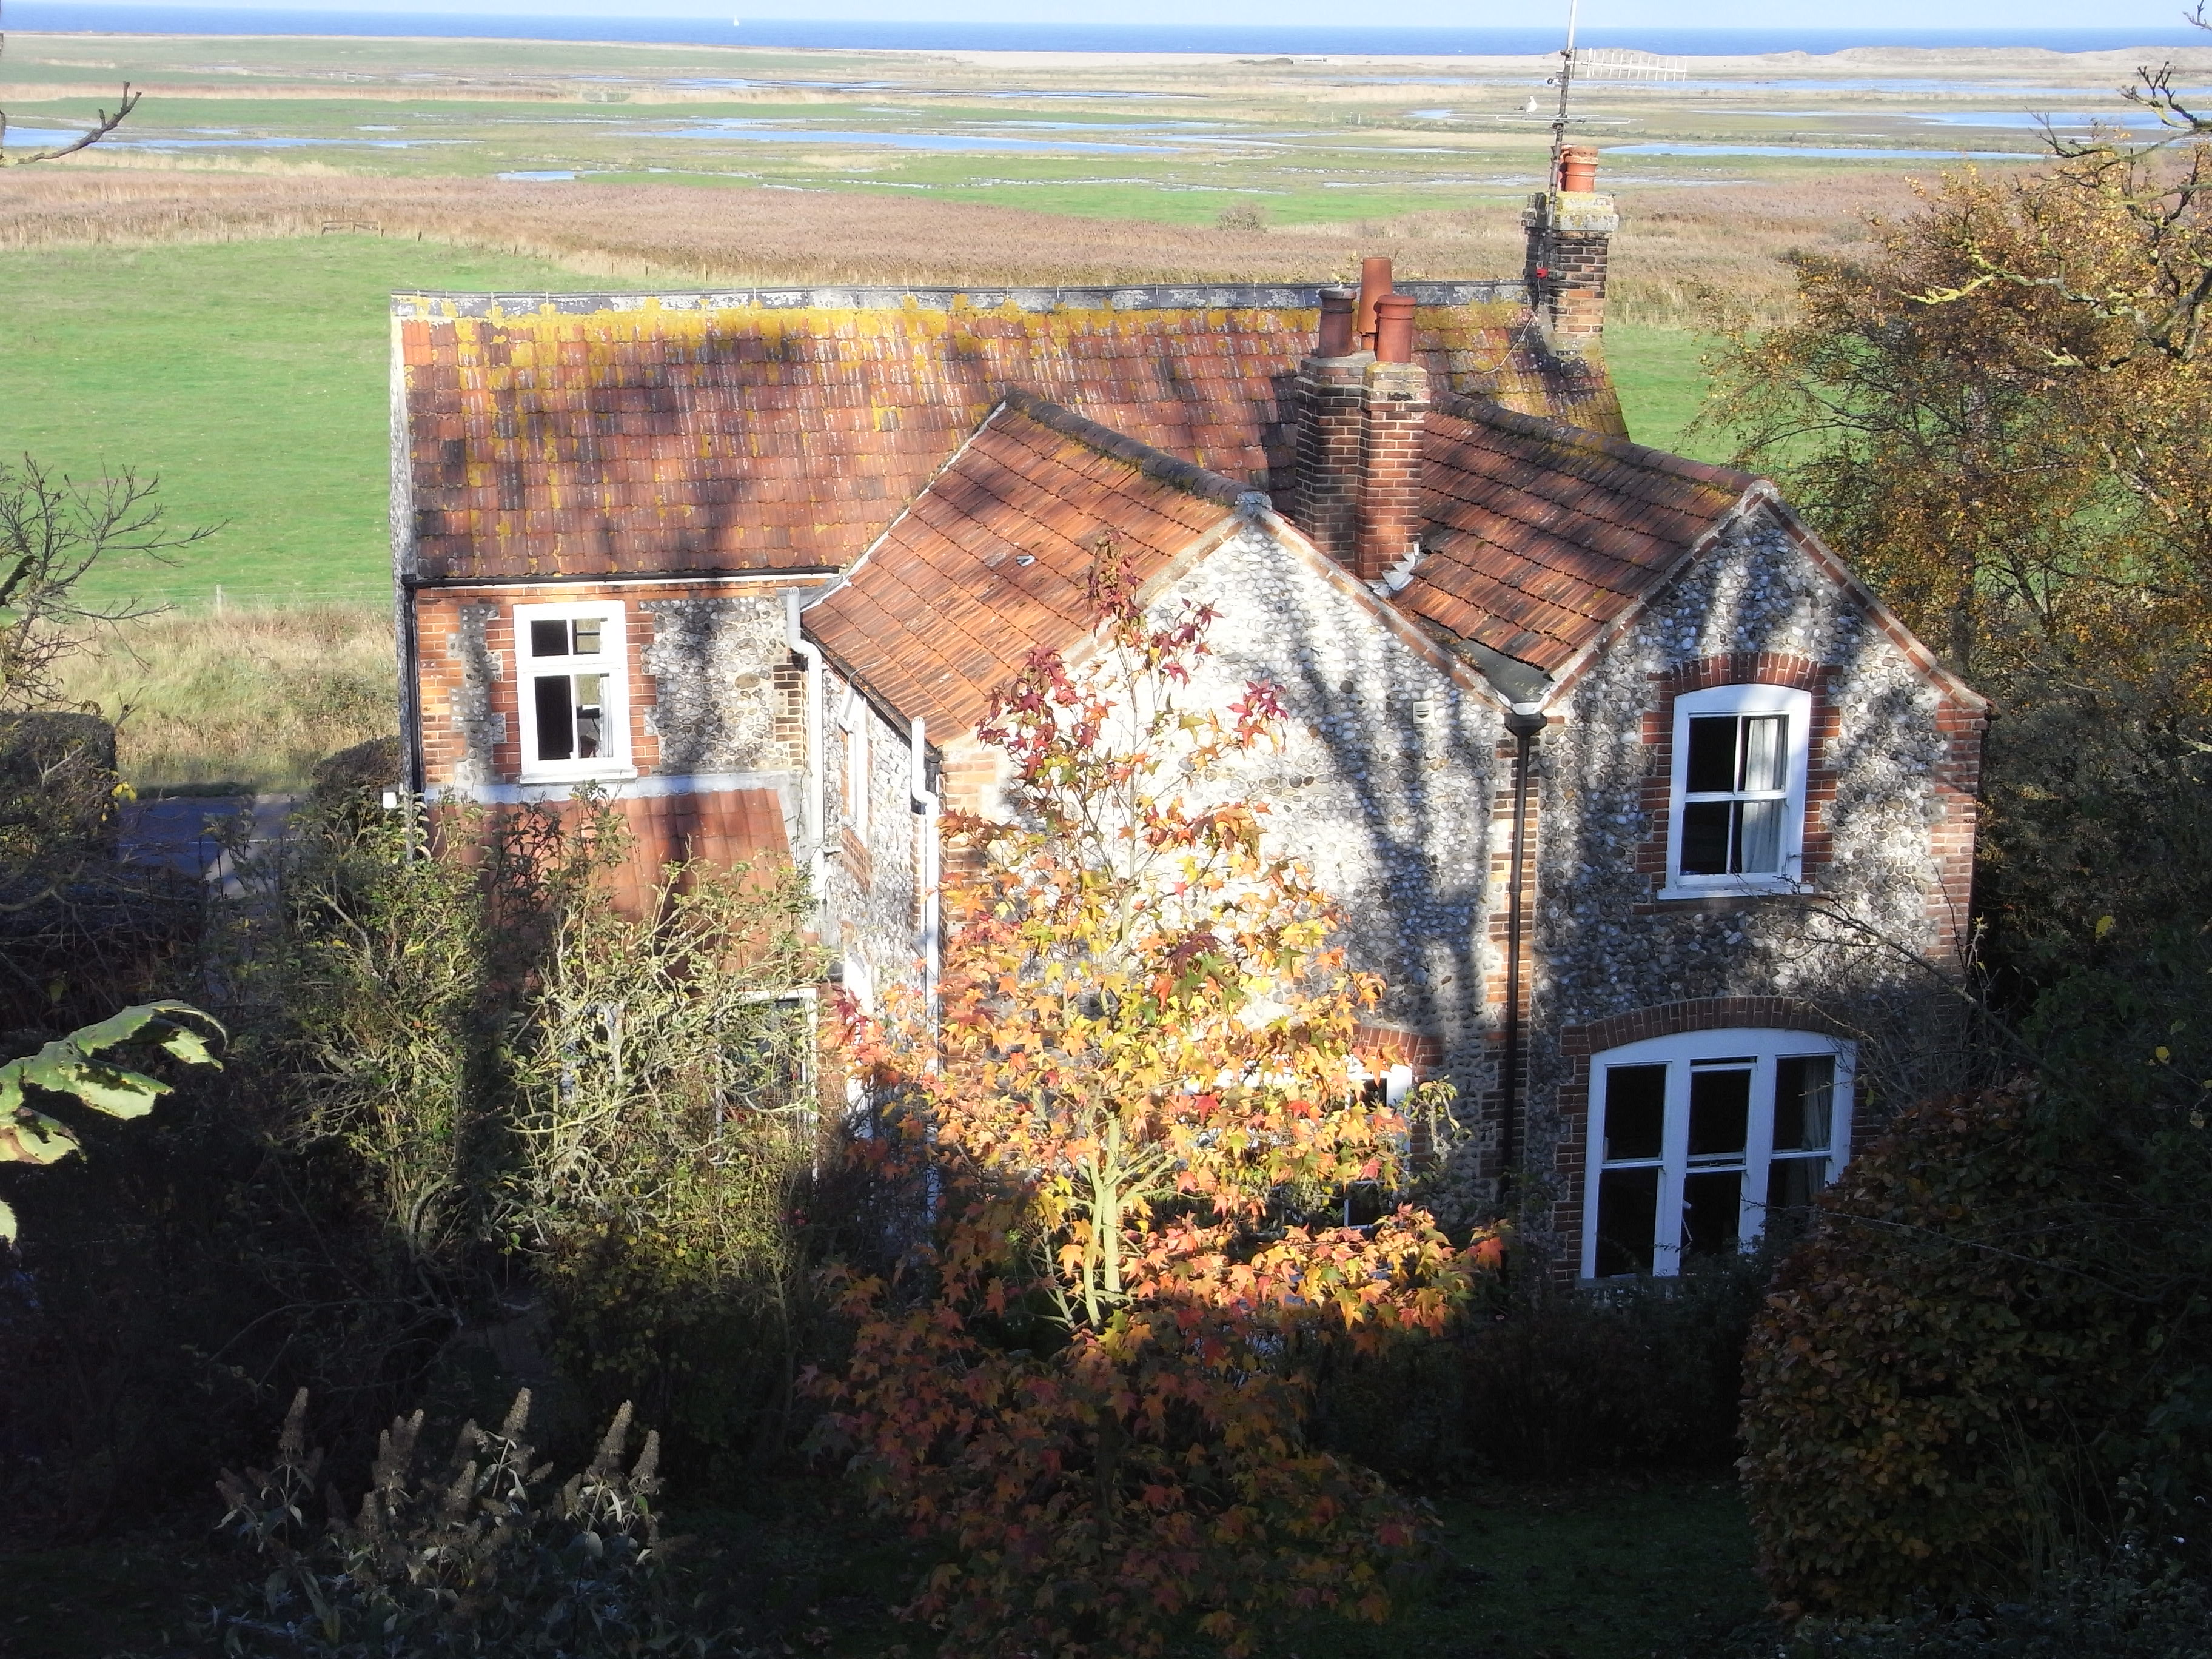 House overlooking marshes at Cley, North Norfolk